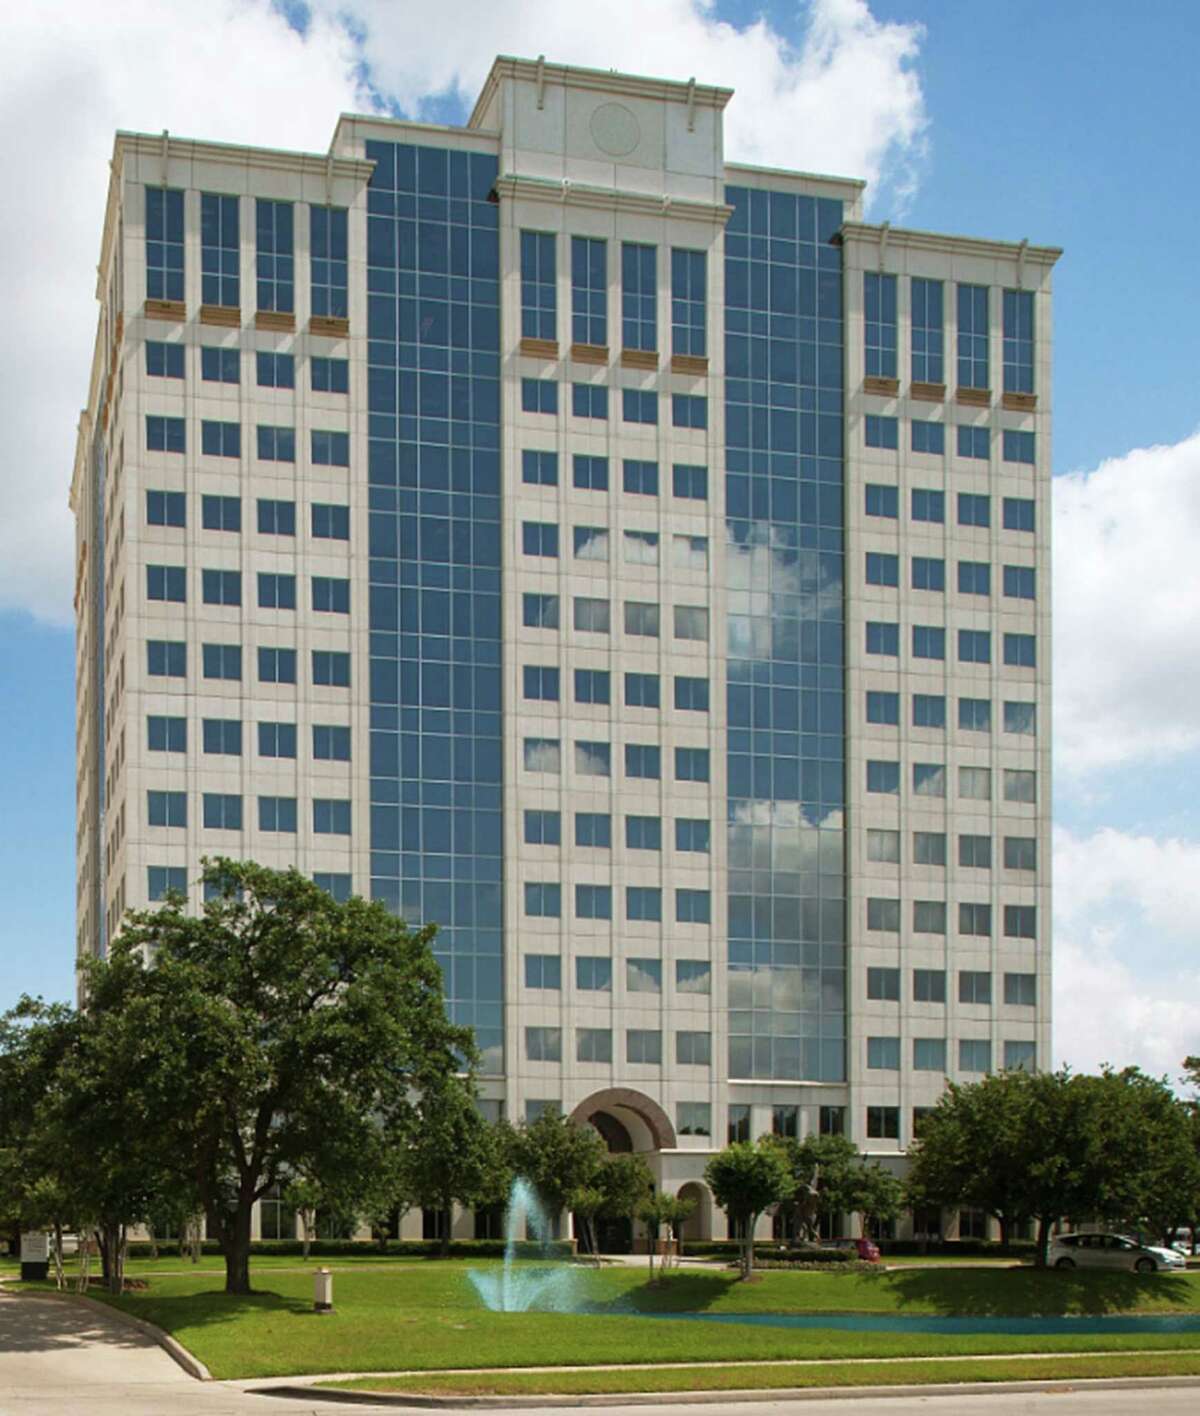 Four subsidiaries of South Korean energy company SK Innovation will consolidate to new offices at Energy Tower, 11700 Katy Freeway. The building is 60 percent leased.